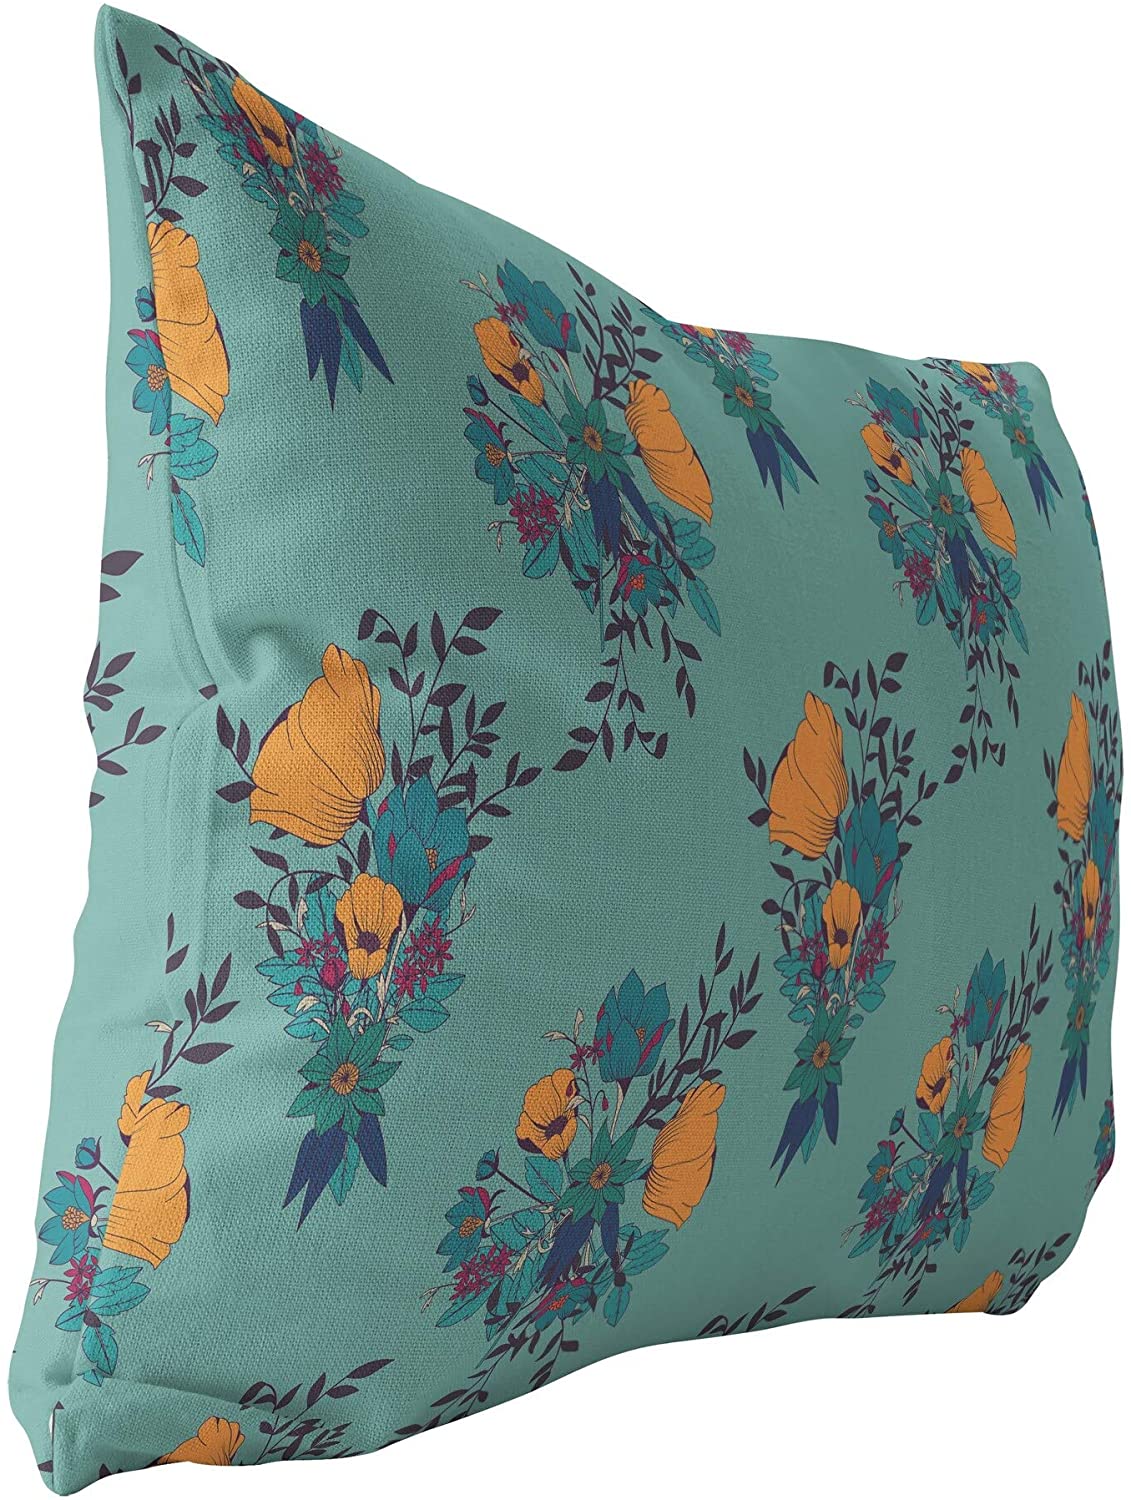 Flora Indoor|Outdoor Lumbar Pillow 20x14 Blue Floral Modern Contemporary Polyester Removable Cover